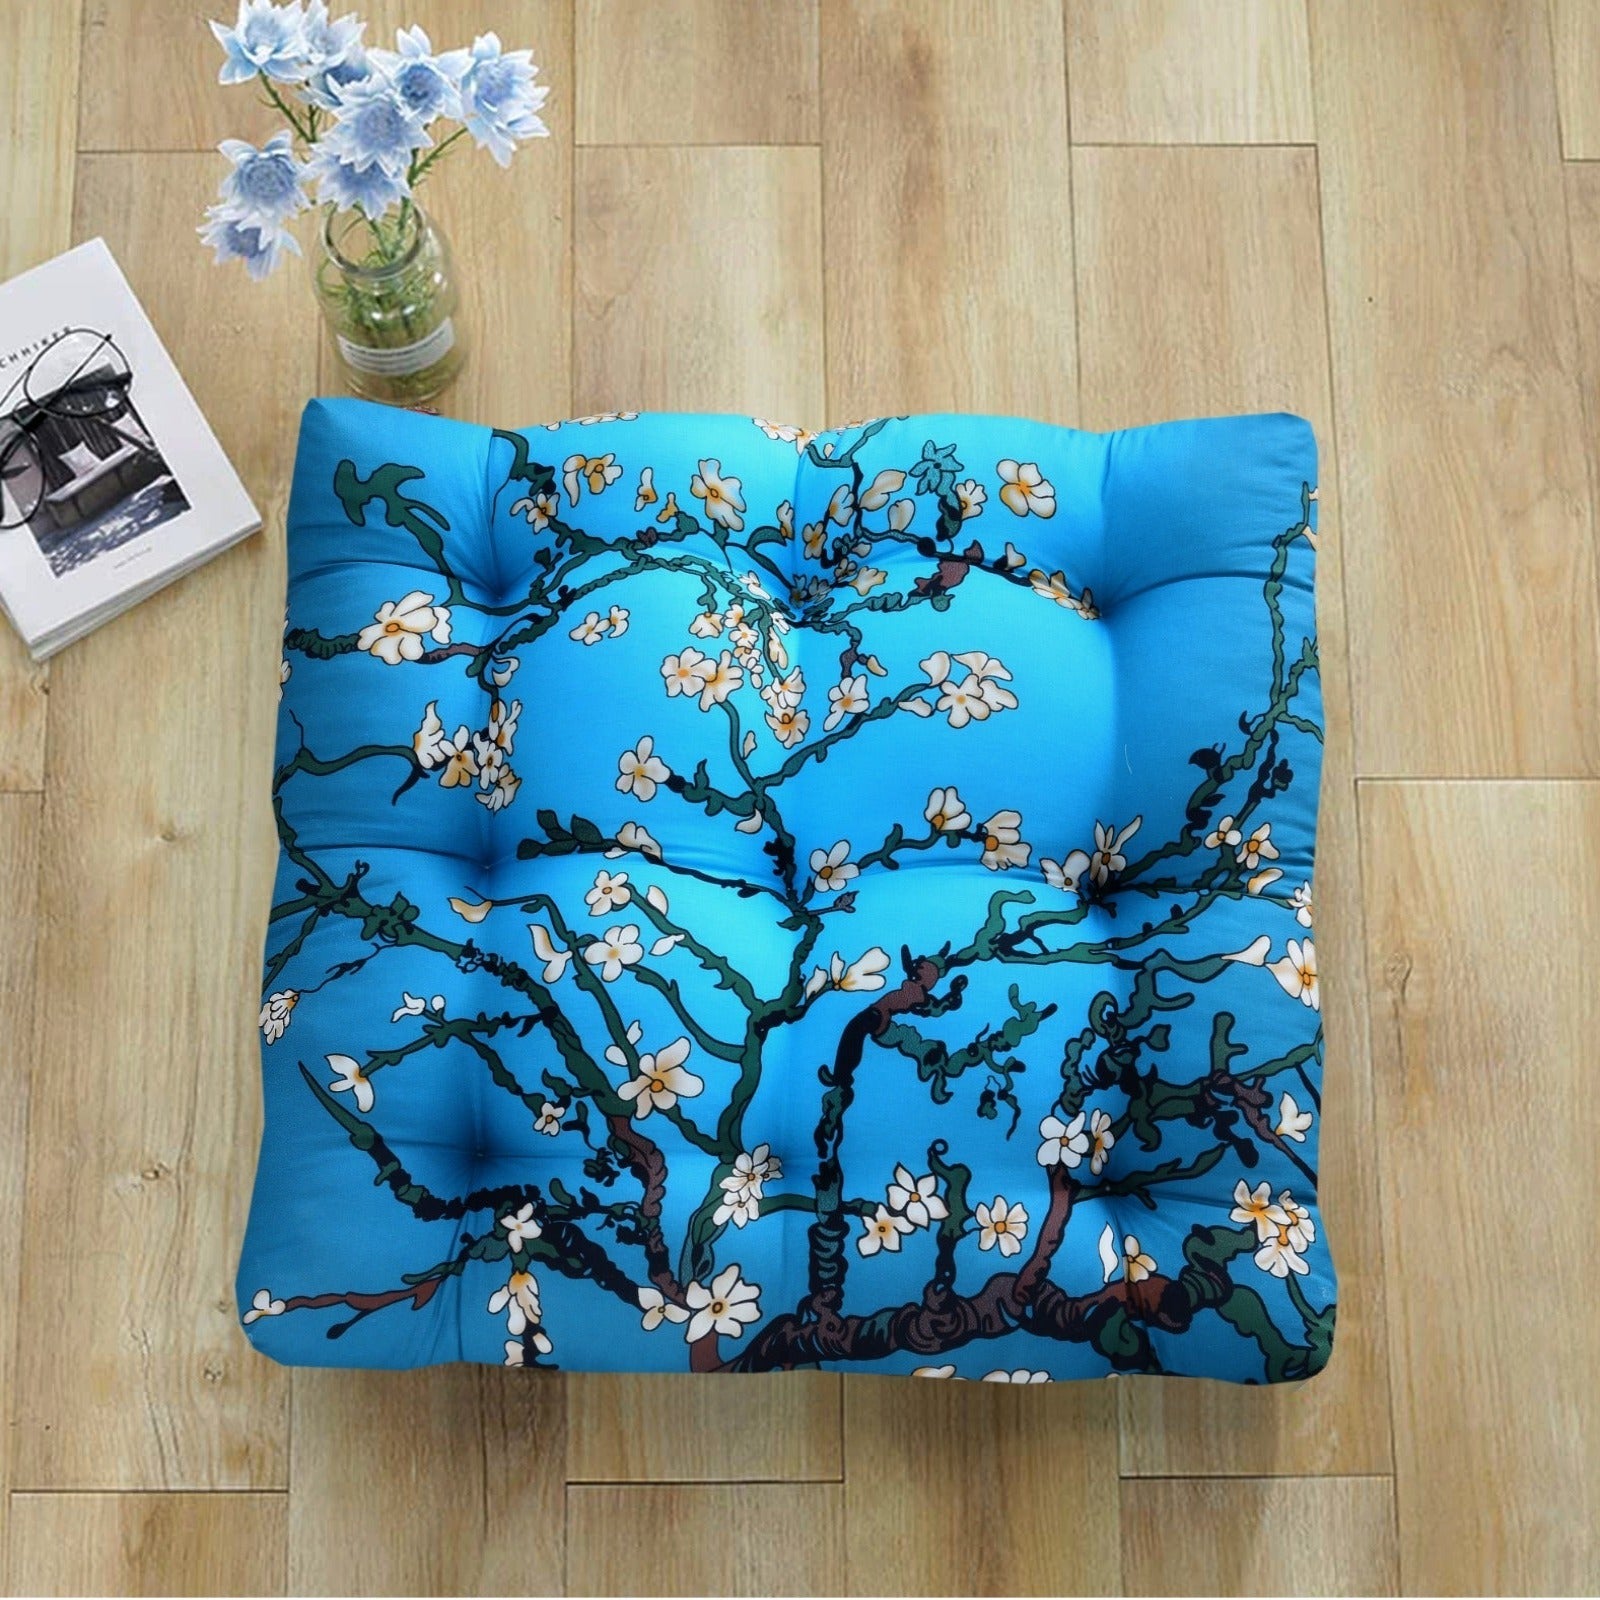 Digital Printed Square Floor Cushions-Roots Apricot